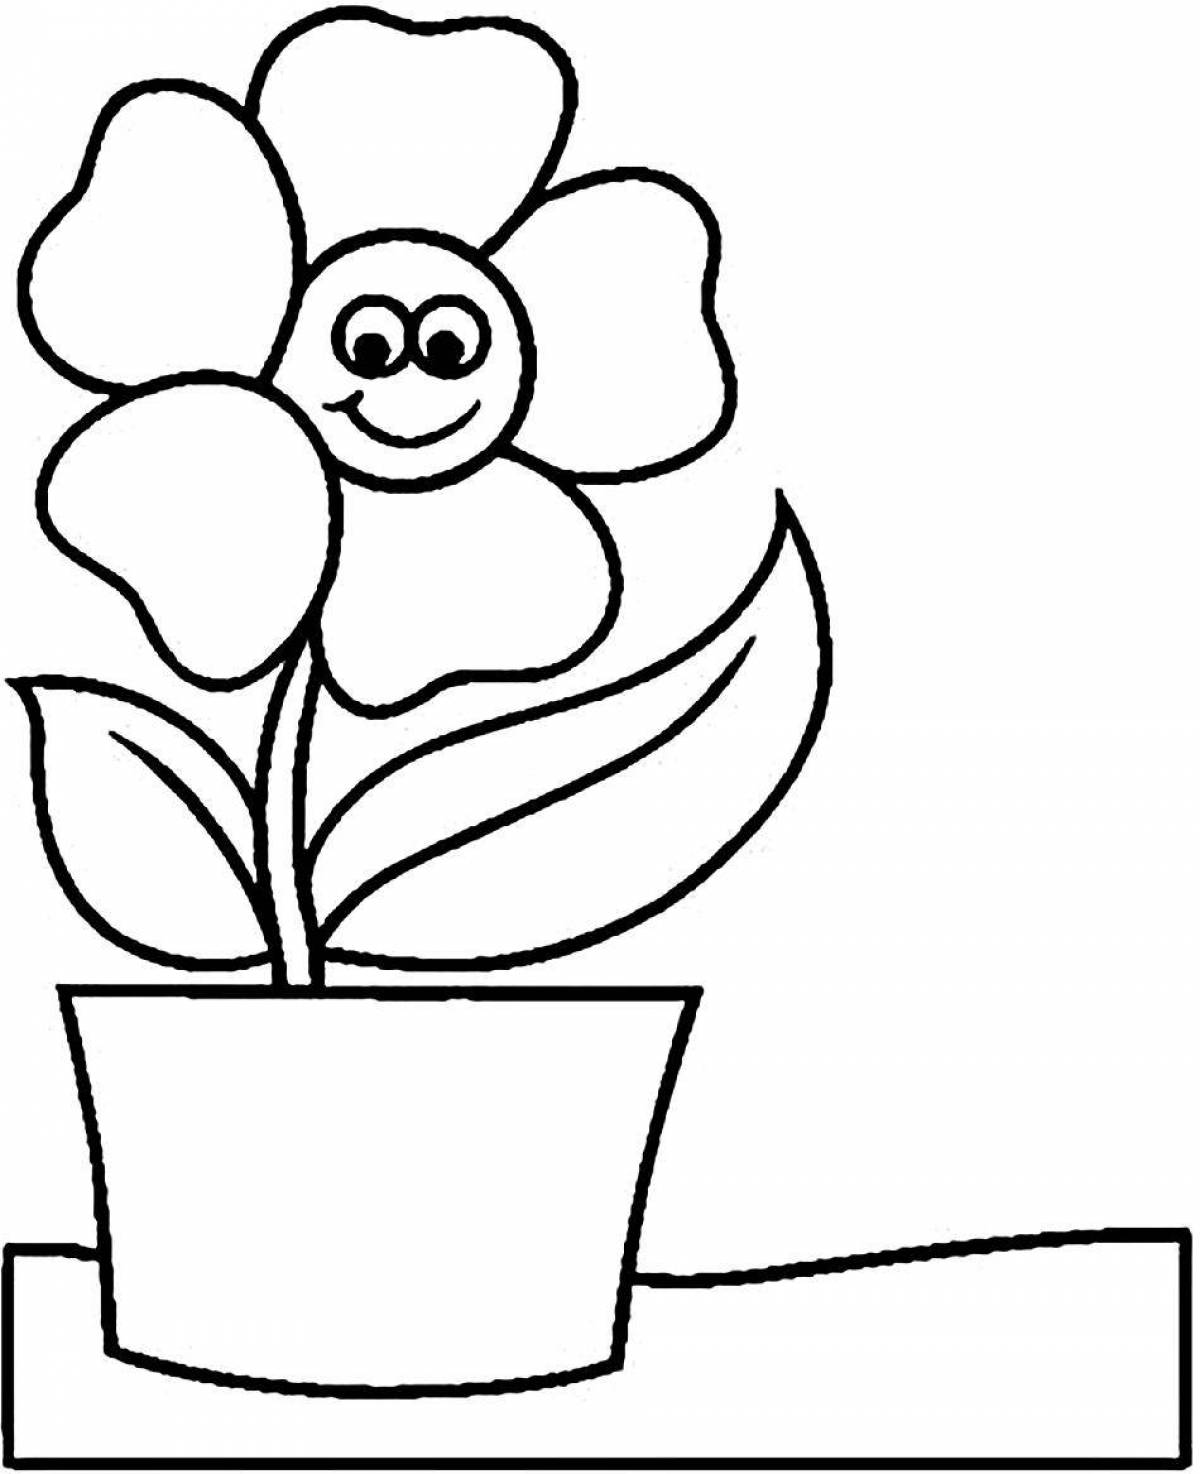 Coloring page majestic flower in a pot